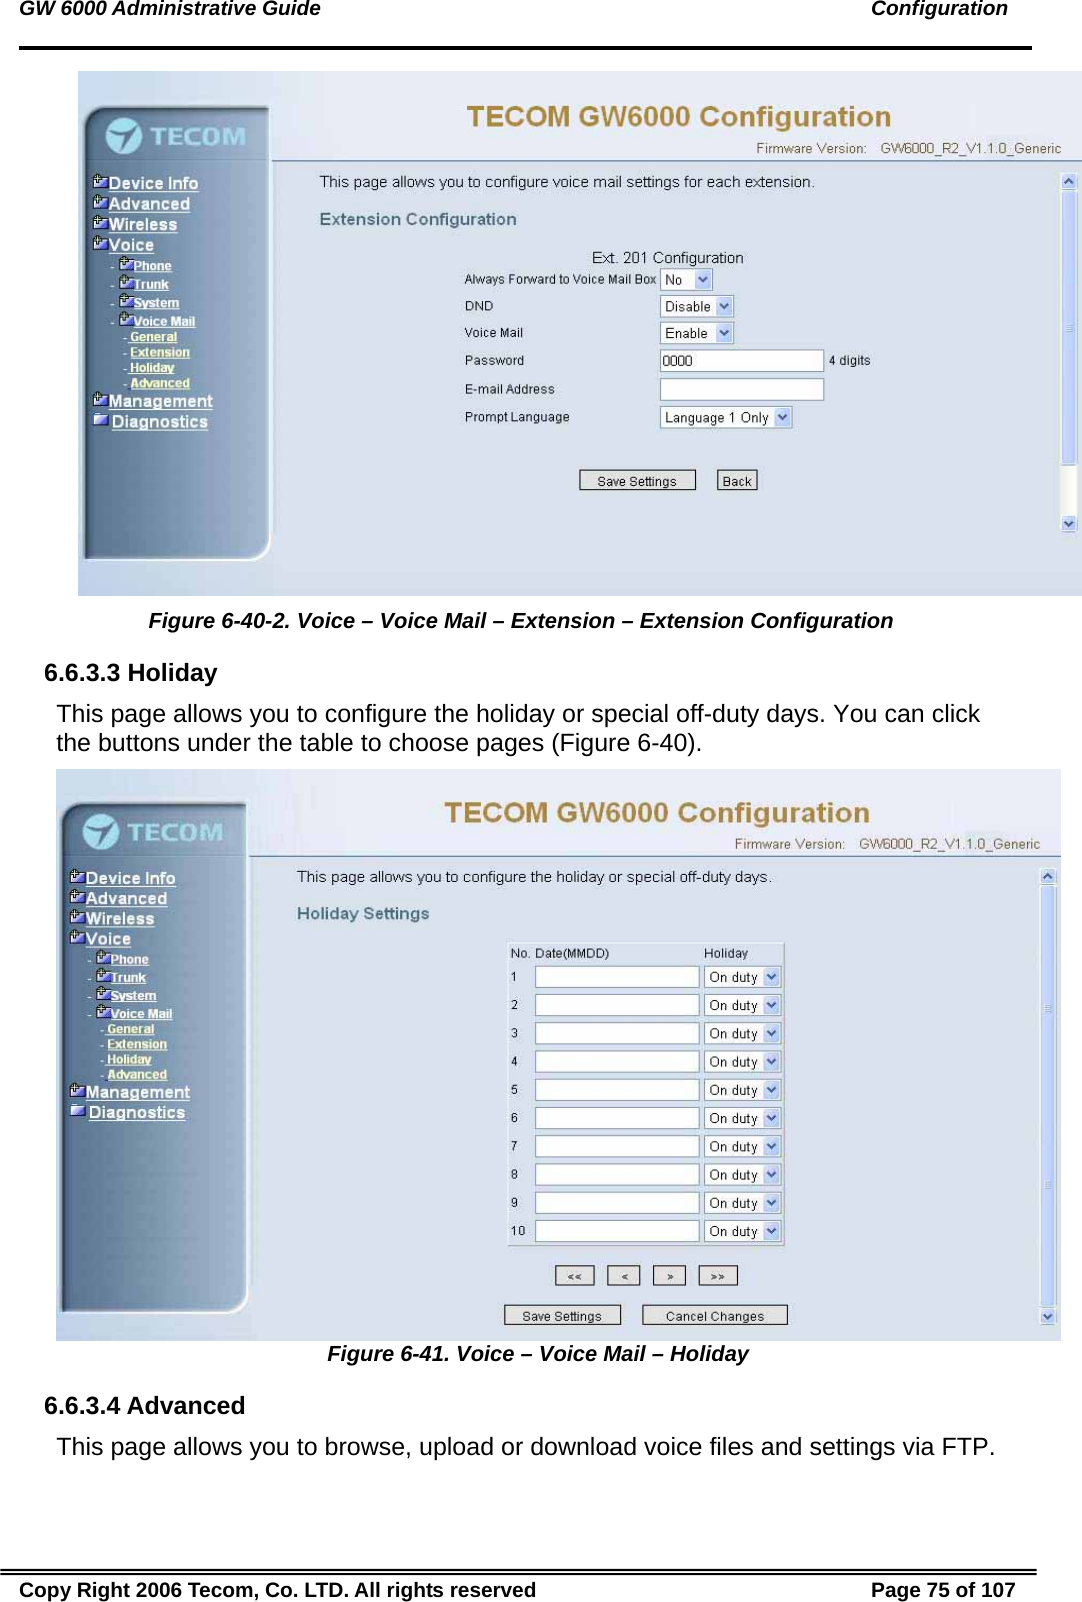 GW 6000 Administrative Guide                                                                                               Configuration  Figure 6-40-2. Voice – Voice Mail – Extension – Extension Configuration 6.6.3.3 Holiday This page allows you to configure the holiday or special off-duty days. You can click the buttons under the table to choose pages (Figure 6-40).  Figure 6-41. Voice – Voice Mail – Holiday 6.6.3.4 Advanced This page allows you to browse, upload or download voice files and settings via FTP.  Copy Right 2006 Tecom, Co. LTD. All rights reserved  Page 75 of 107 